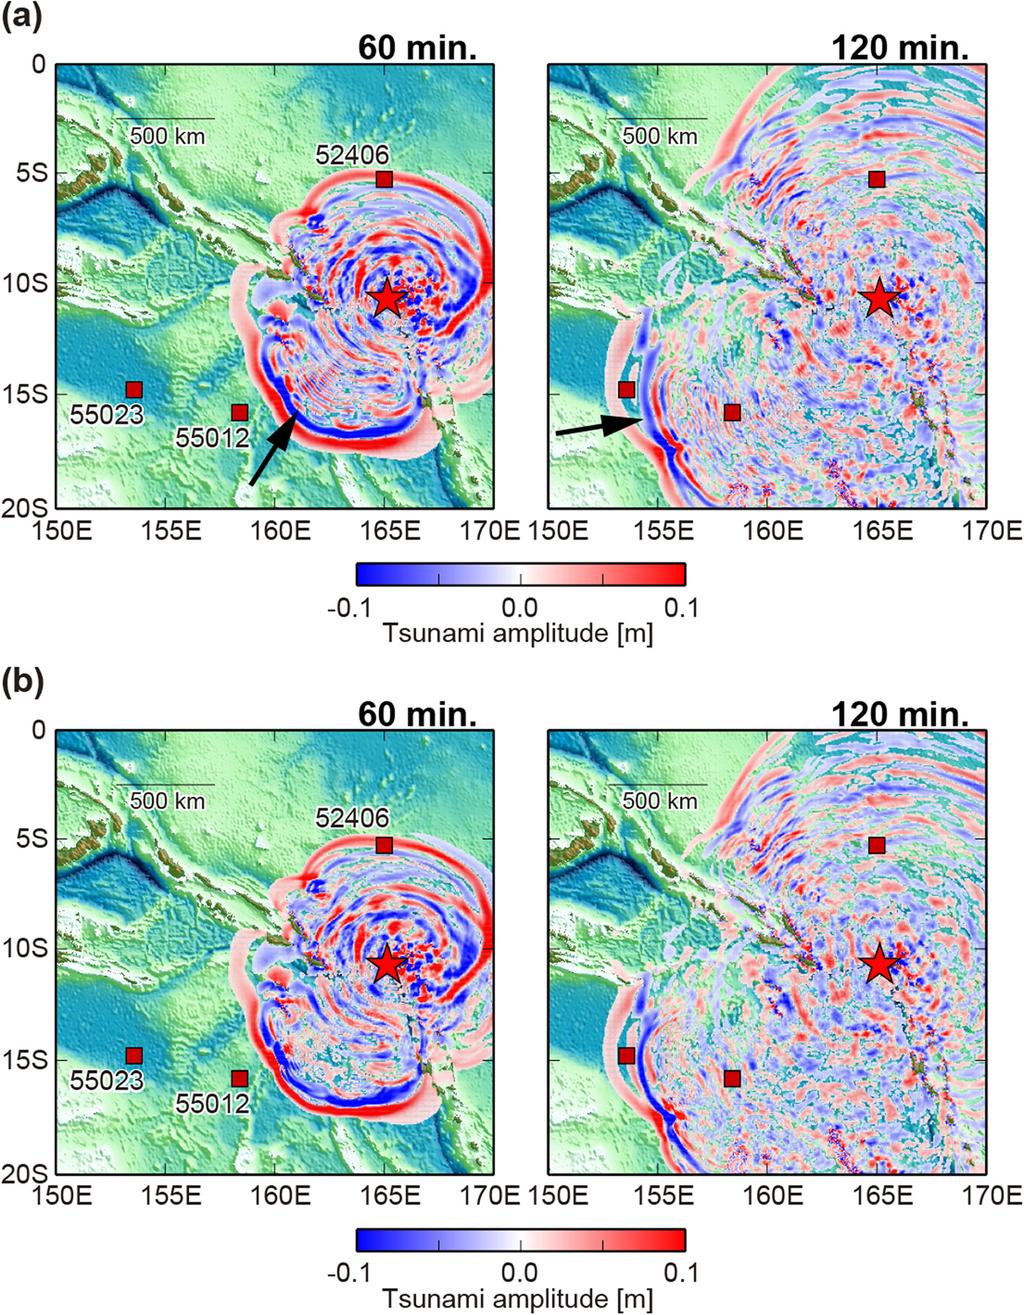 Miyoshi et al. Earth, Planets and Space (2015) 67:4 Page 5 of 7 Figure 3 Snapshots of tsunami propagation at the elapsed time of 60 and 120 min. (a) Dispersive model and (b) non-dispersive model.